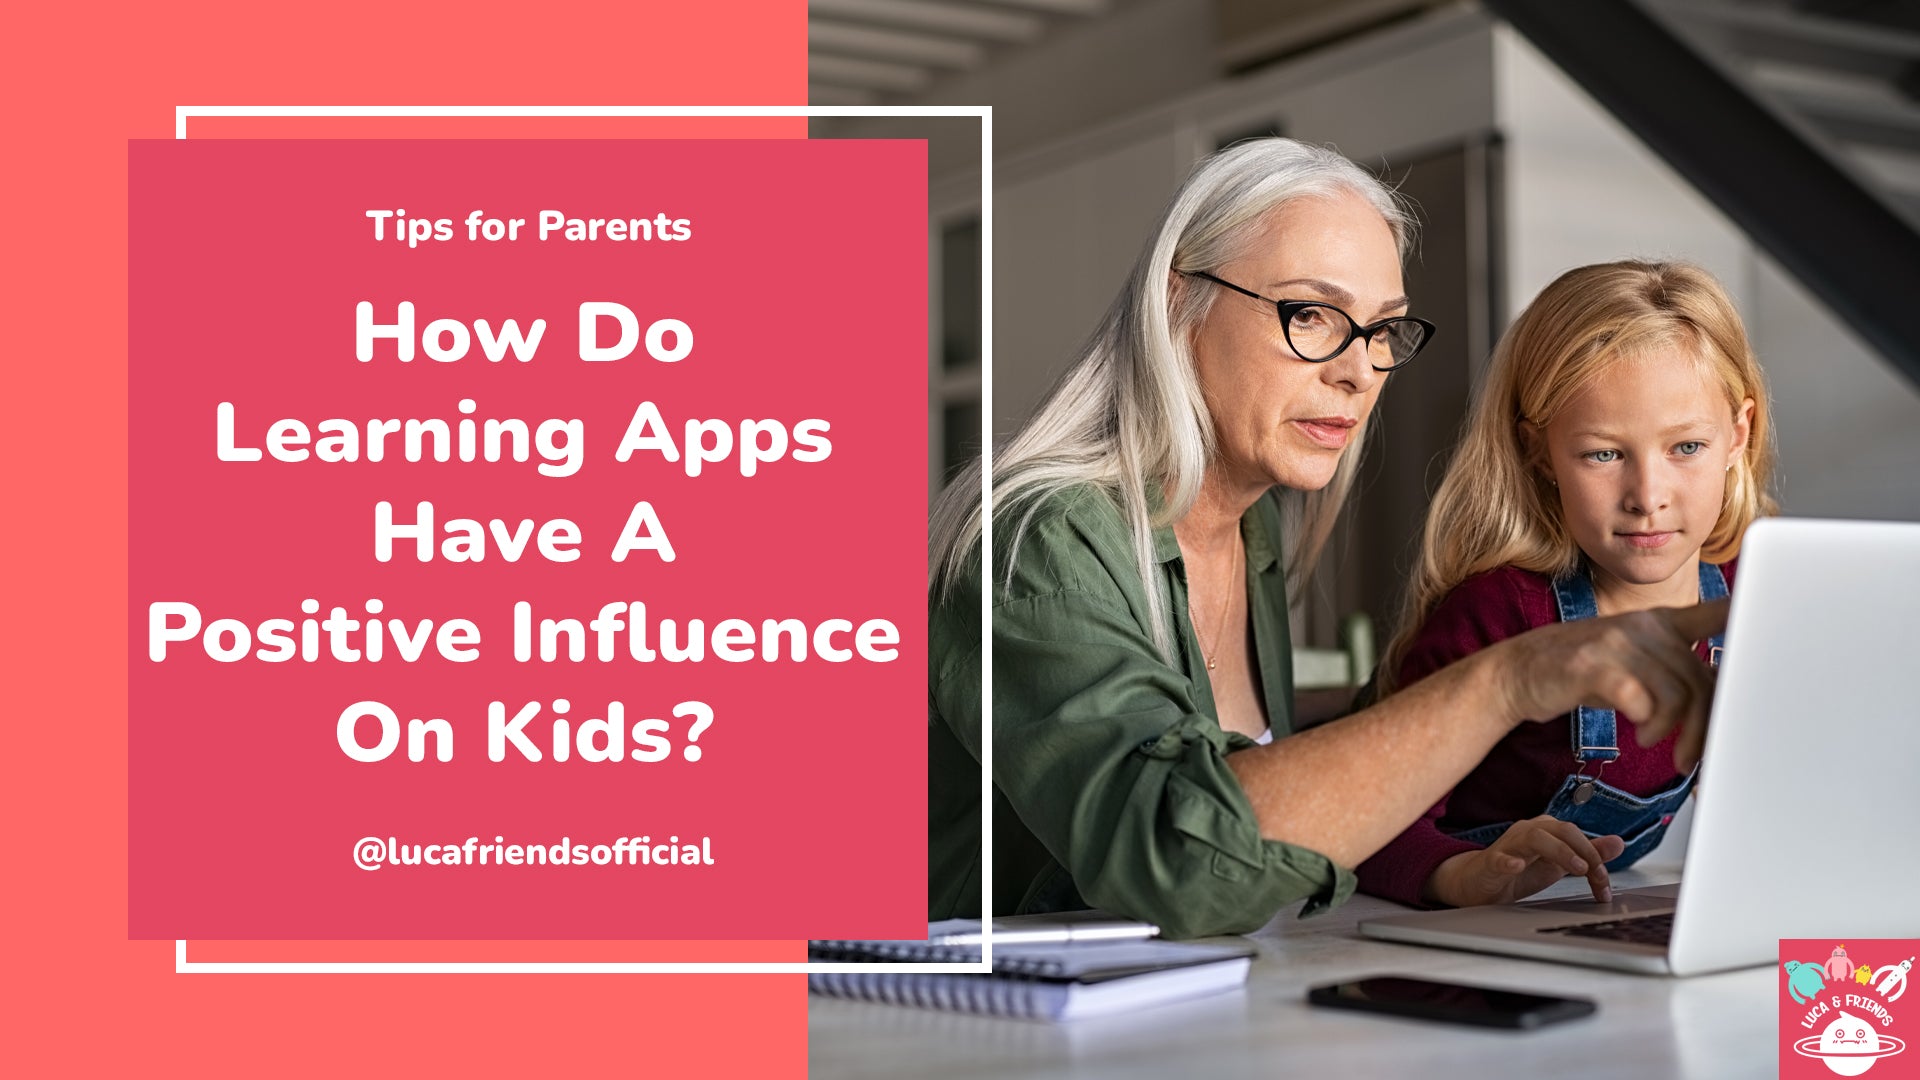 How Do Learning Apps Have A Positive Influence On Kids?